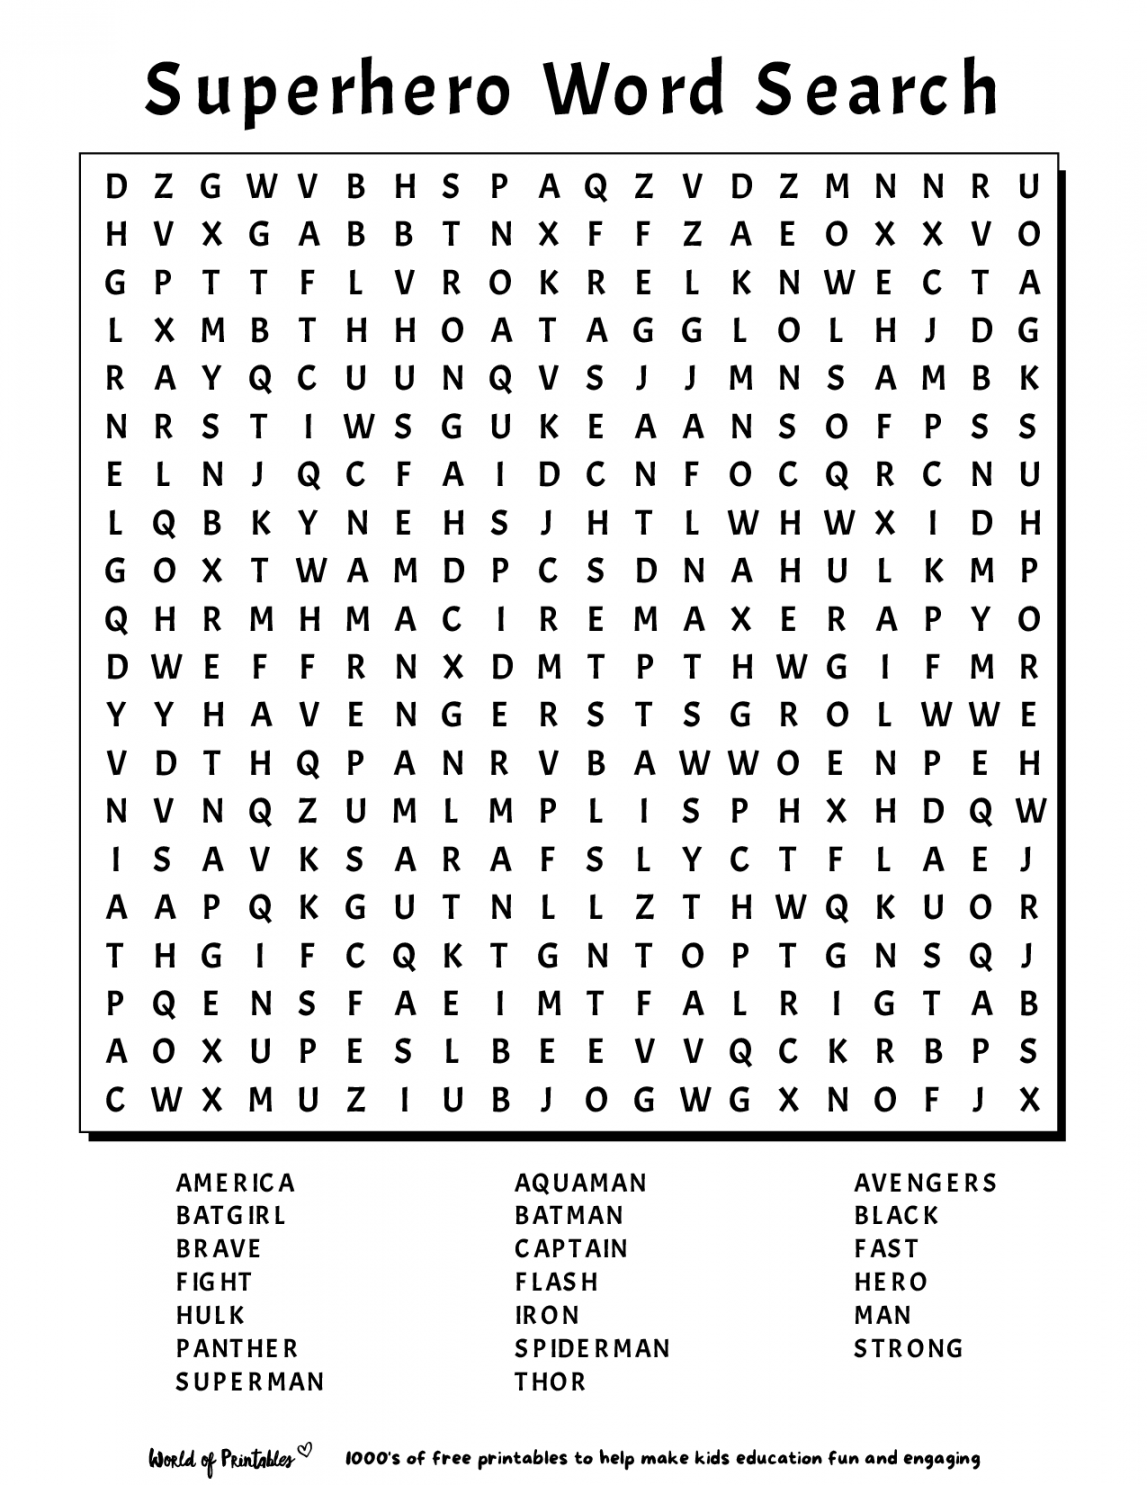 Free Word Search Printable For Adults - Printable - Printable Word Search  World of Printables